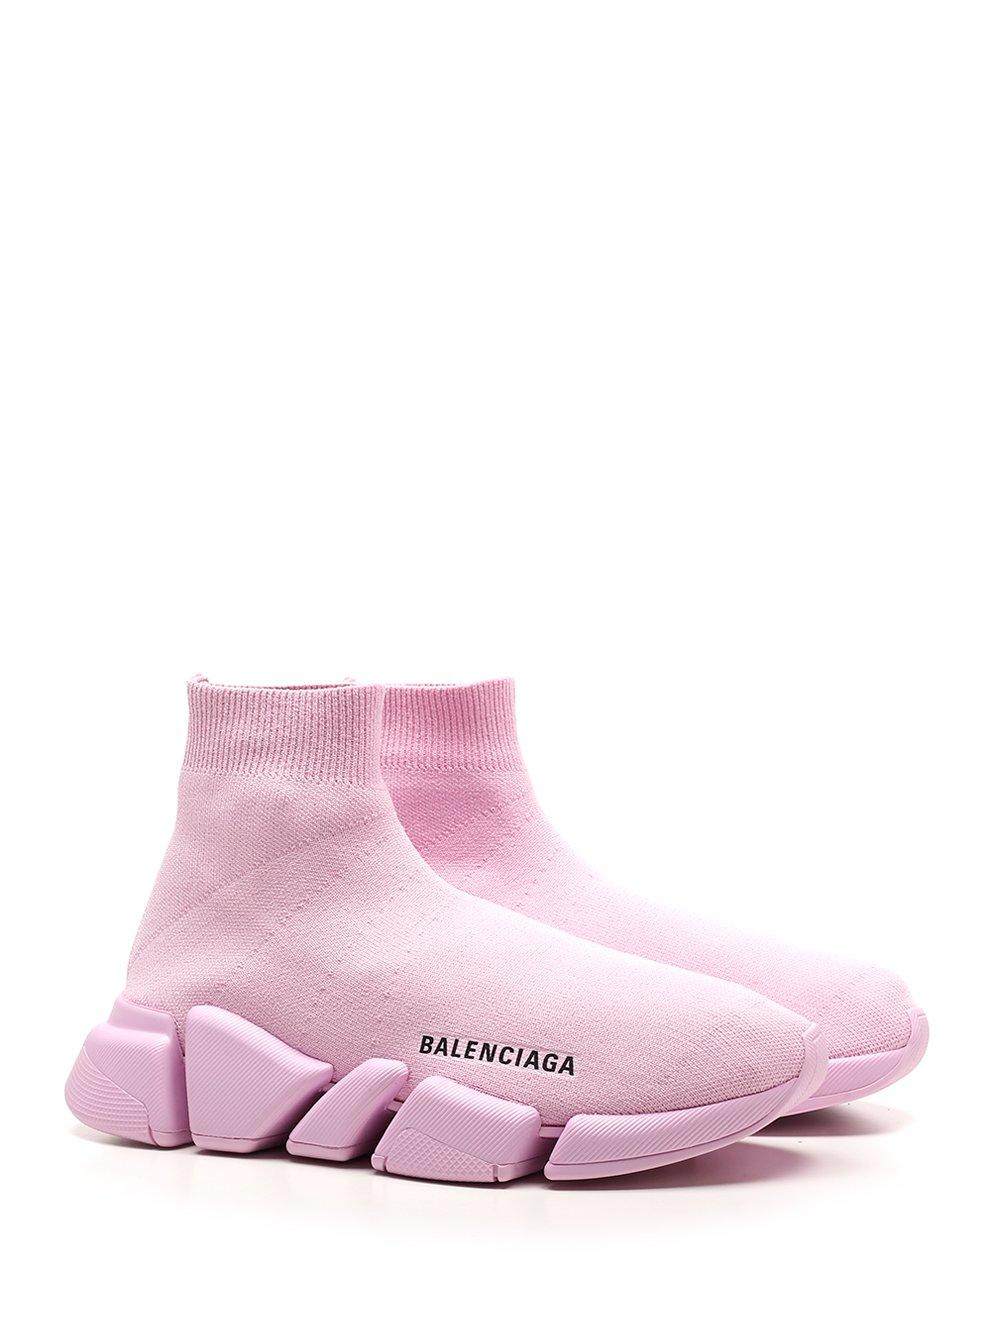 Balenciaga Rubber Speed 2.0 Sneakers in Pink - Lyst